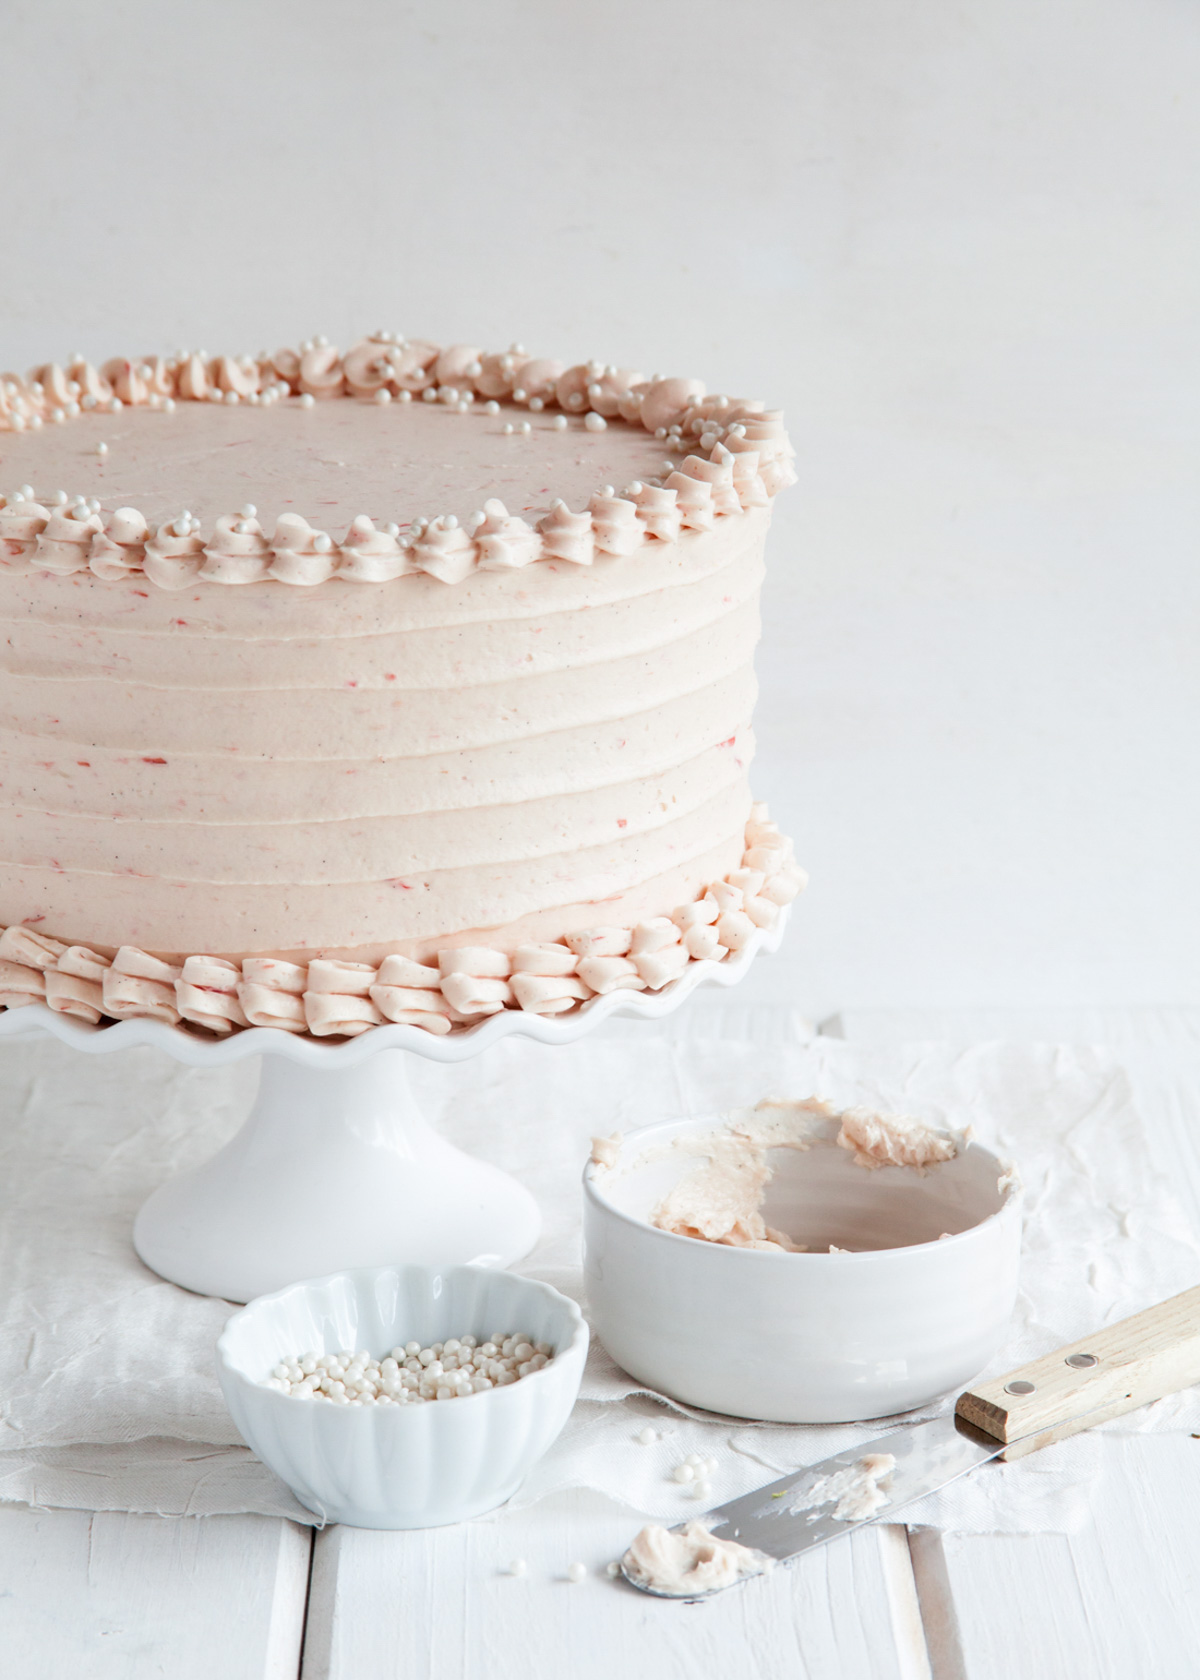 A pink rhubarb ginger cake on a white cake stand.